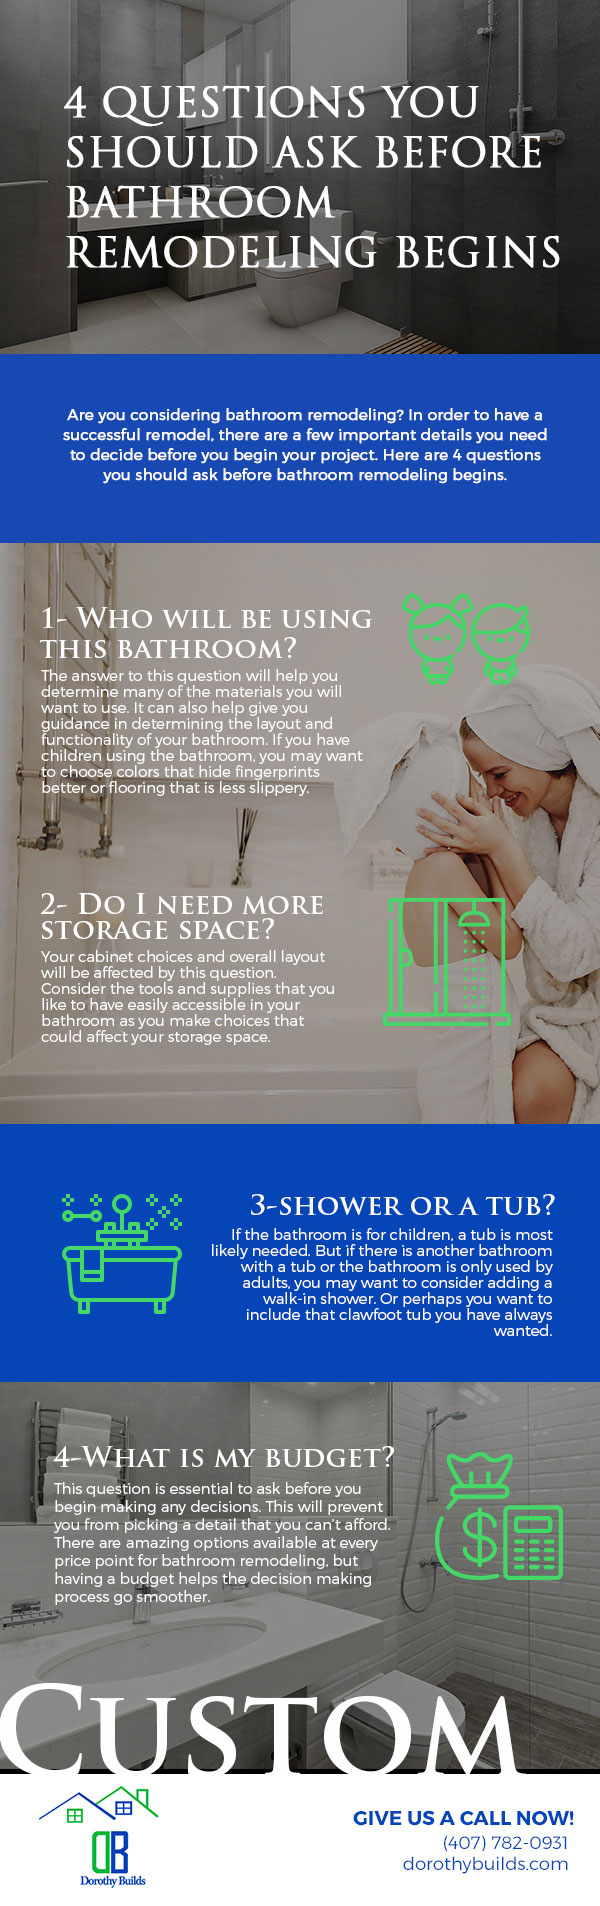 4 Questions You Should Ask Before Bathroom Remodeling Begins